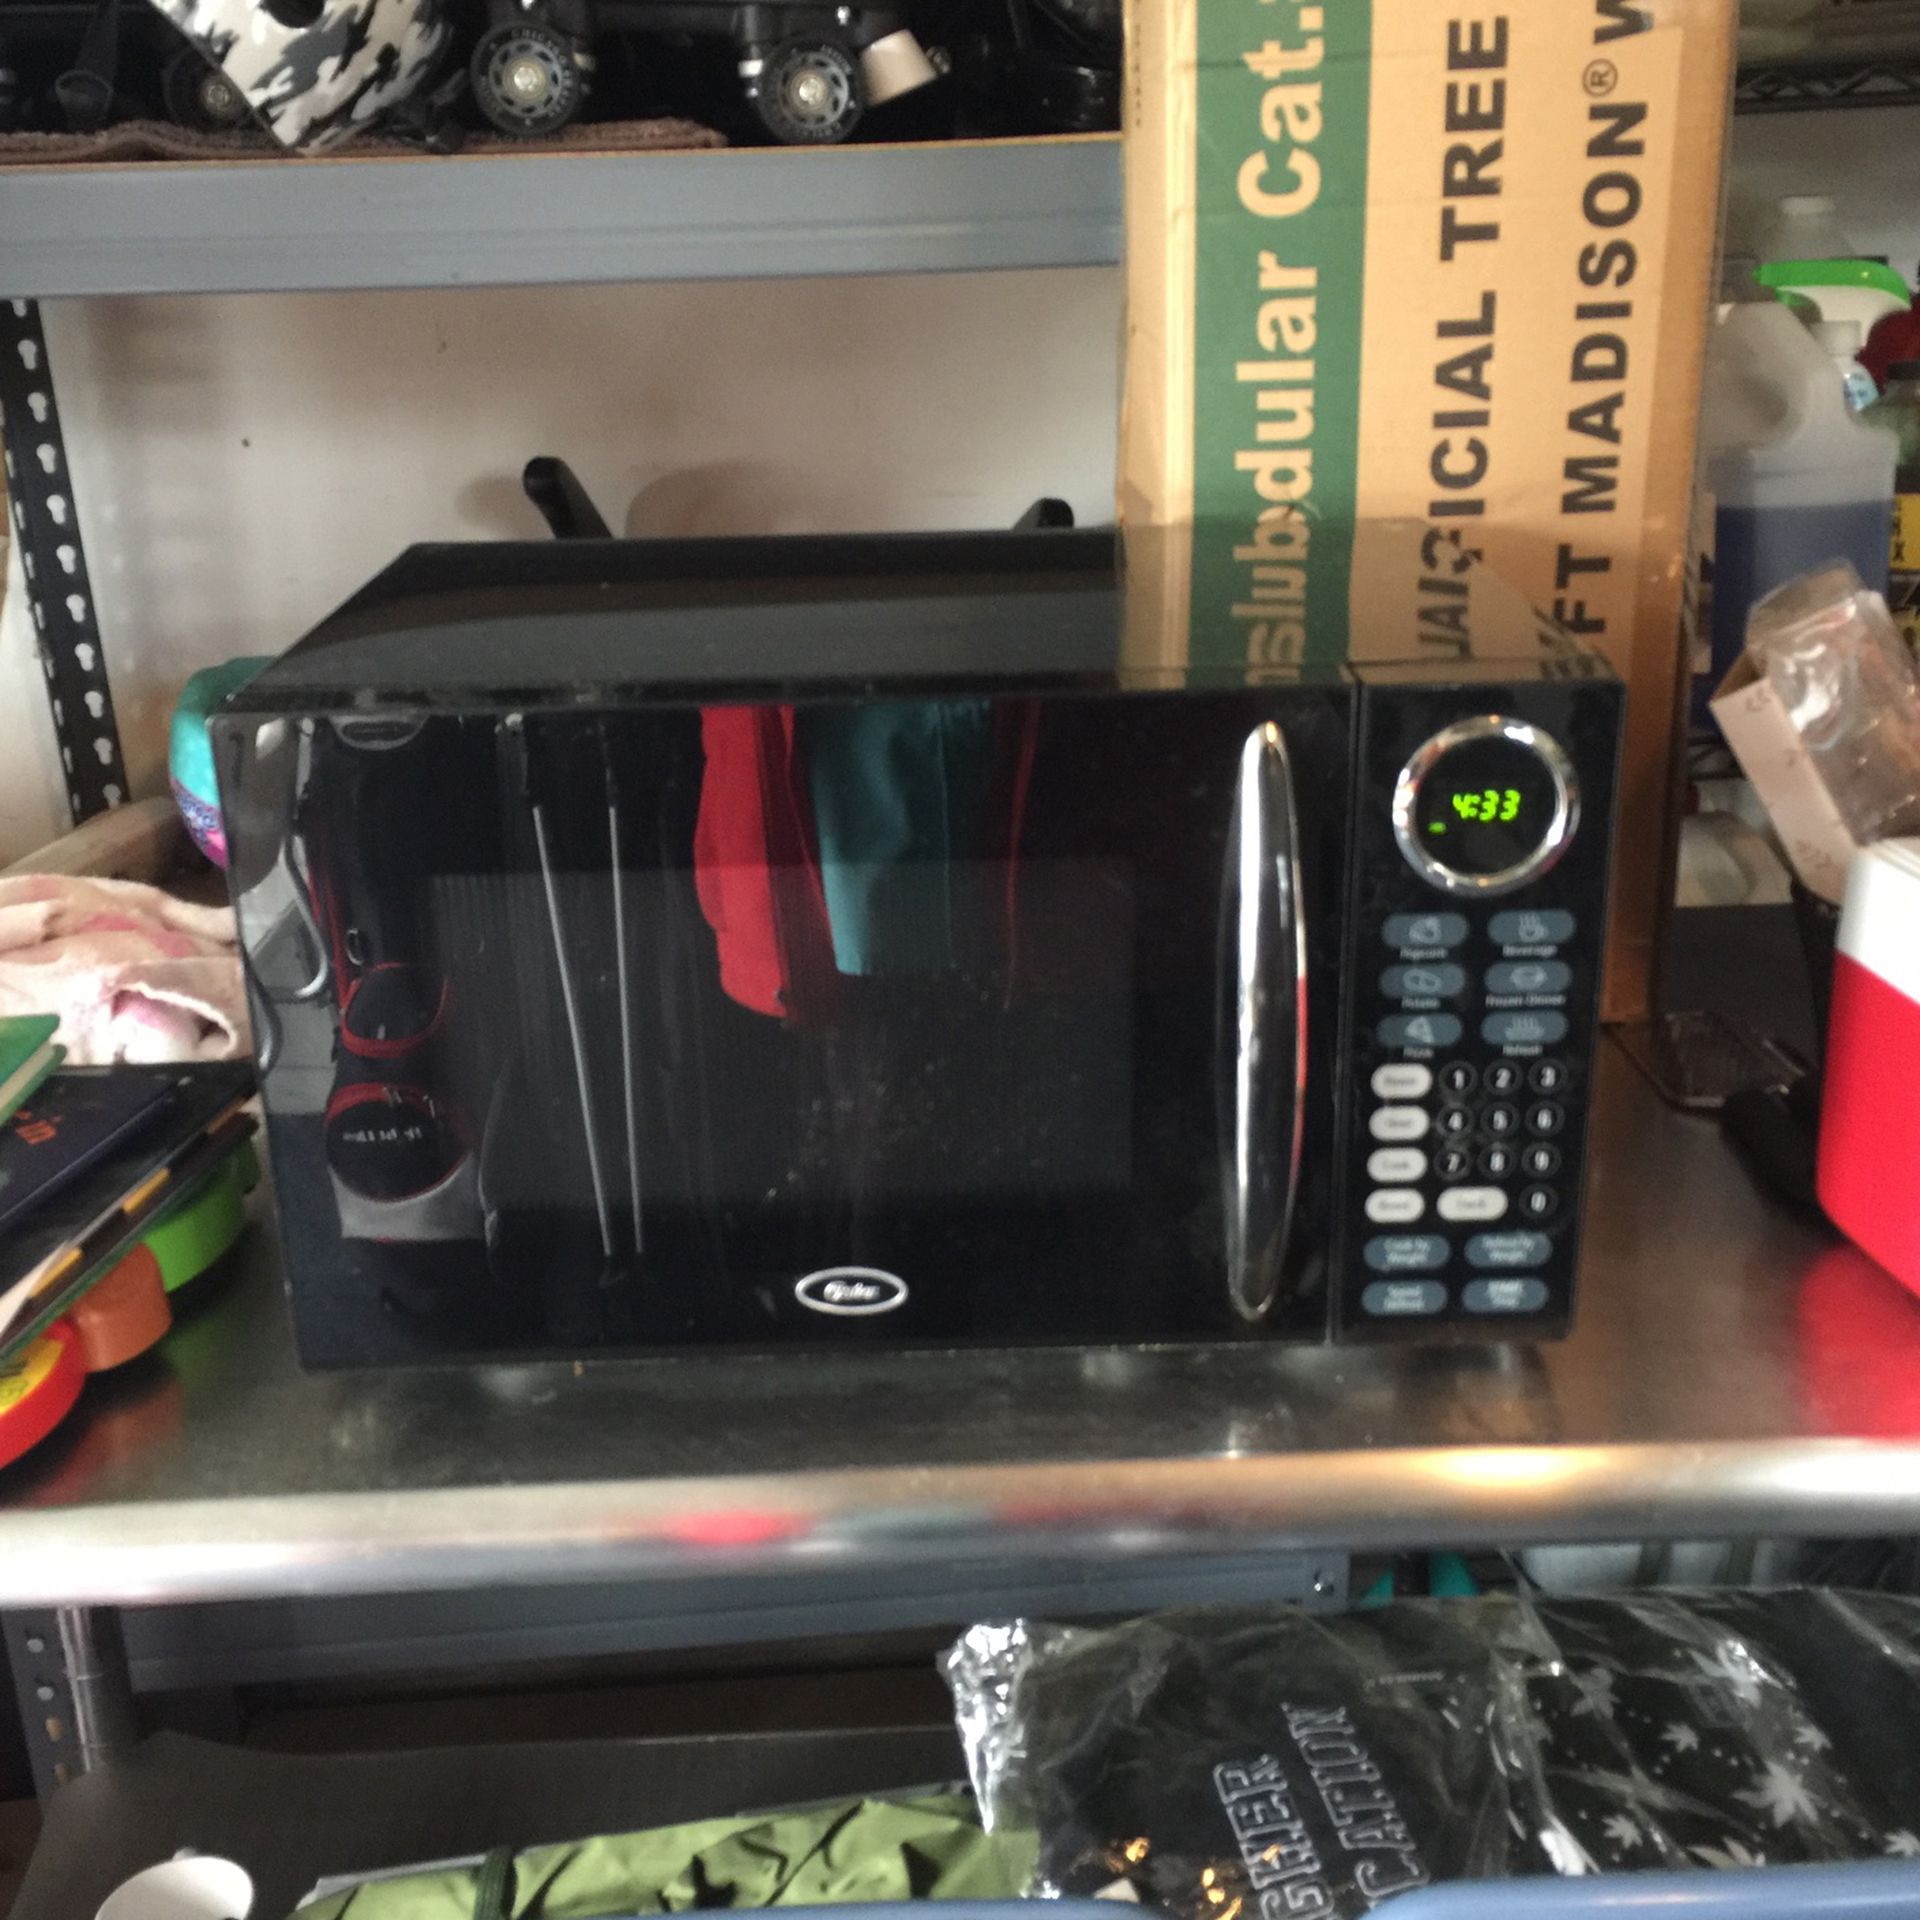 Black Oster Microwave Oven - Oahu Auctions